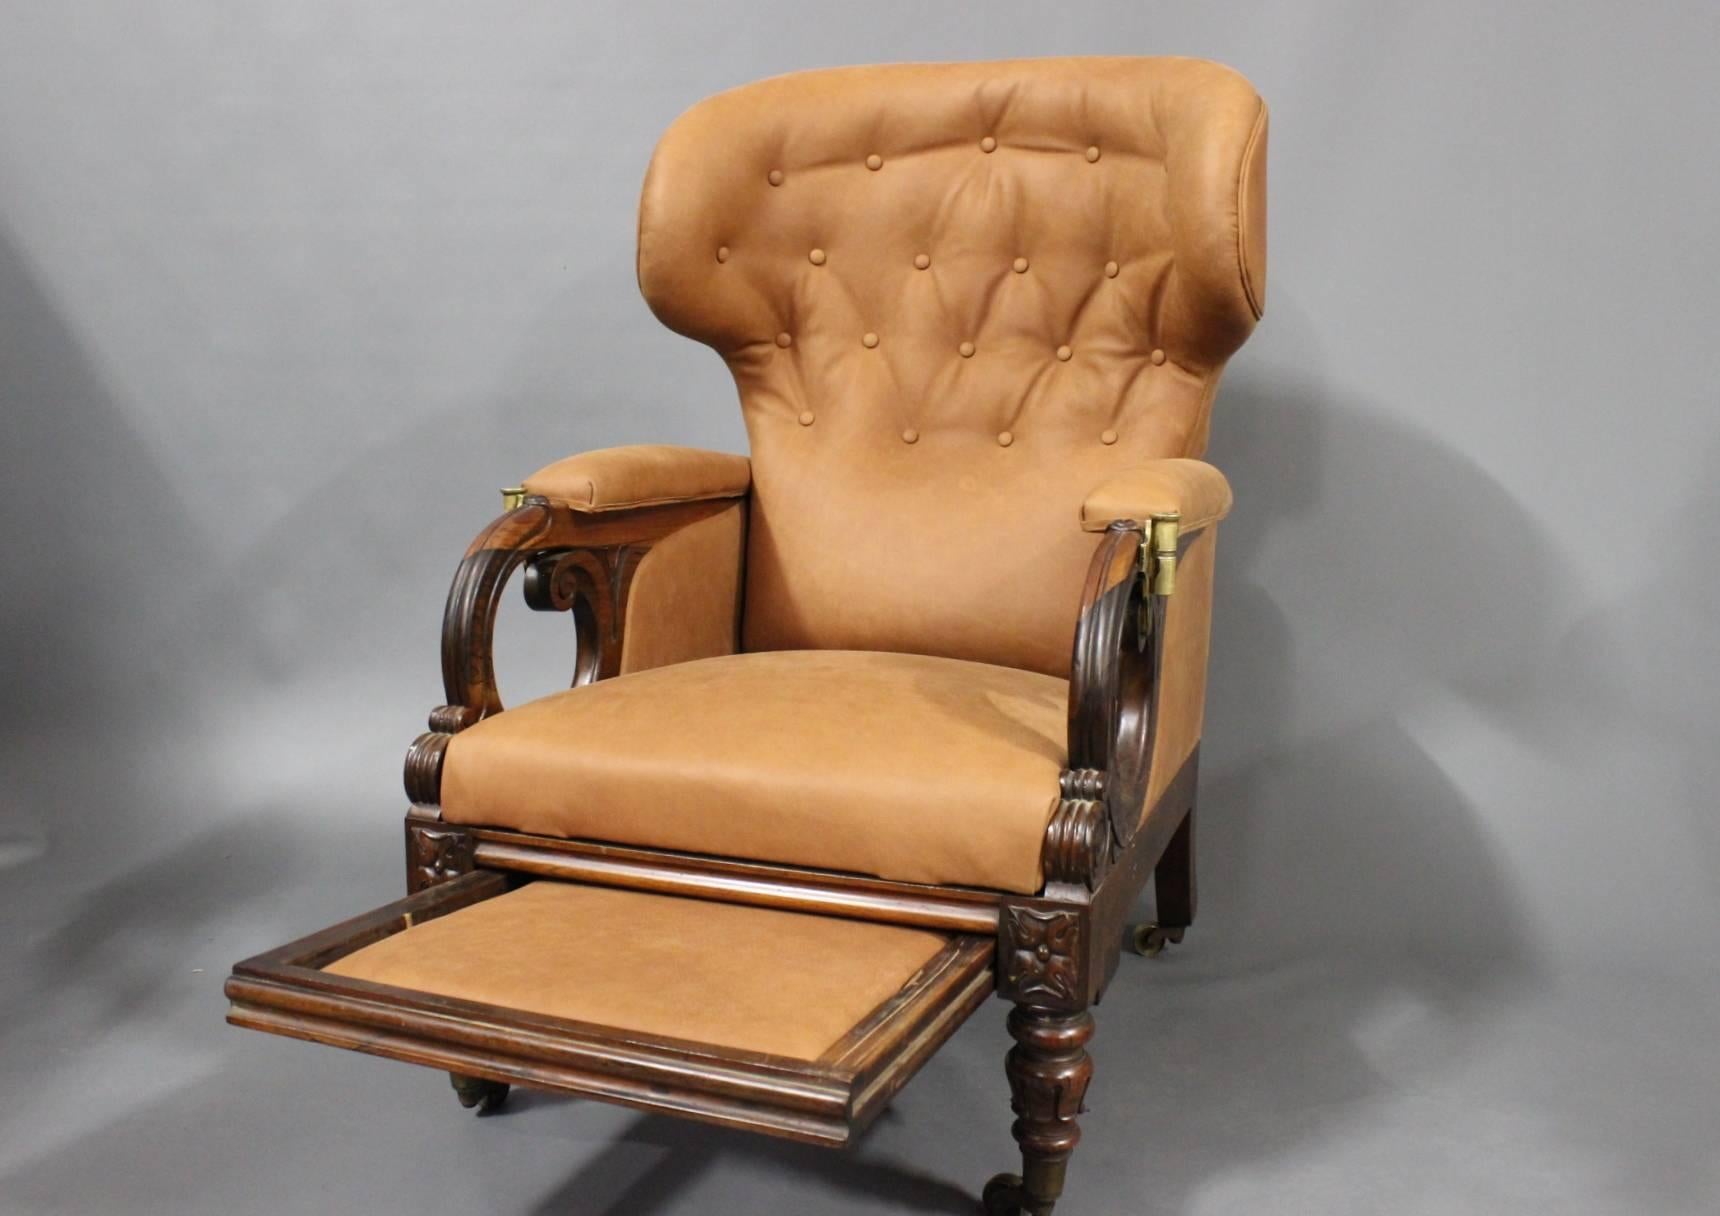 William IV open lounge chair in rosewood and leather with reclining back and sliding footrest by George Minter. The chair is from England and around the 1830s. The chair can be reclined even further. 